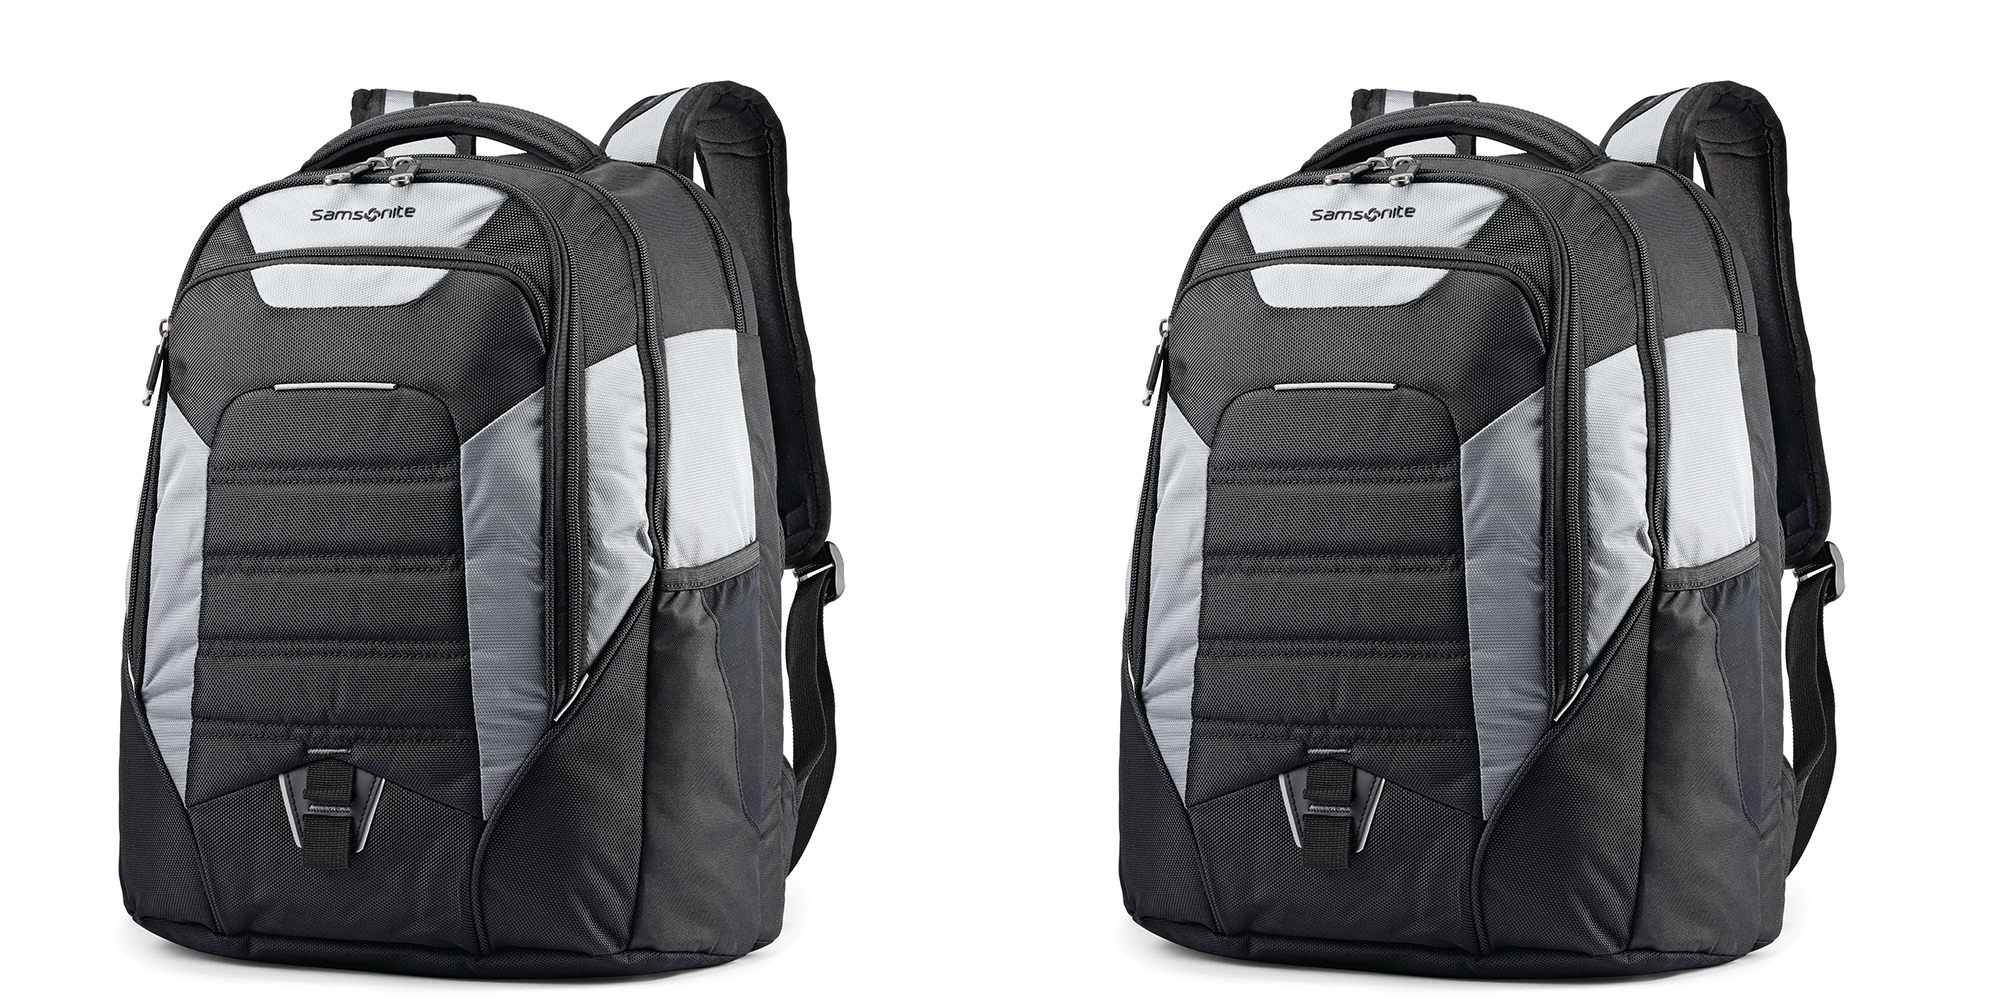 Samsonite UBX Commuter Backpack has room for a 15-inch MacBook, more: $24 shipped - 9to5Toys